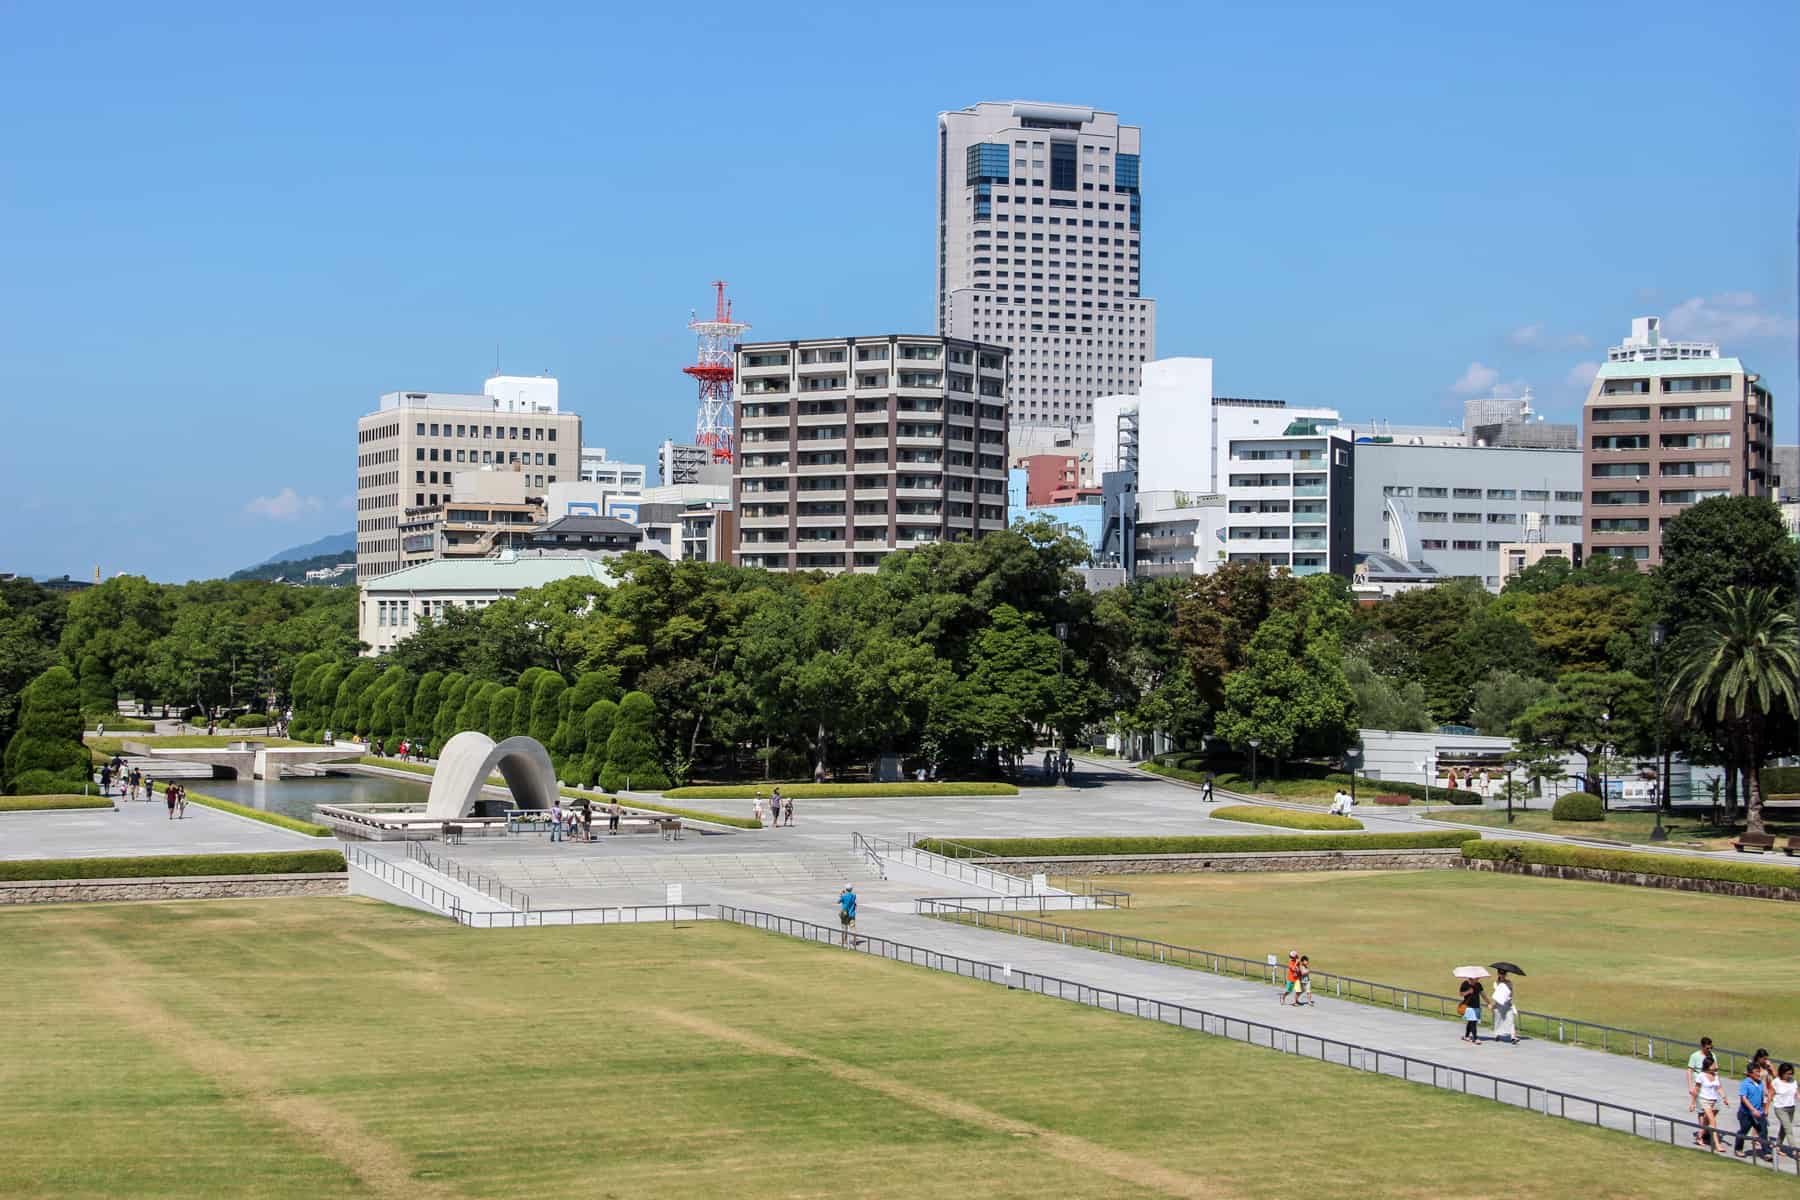 The walk ways and sculptures in the green Hiroshima Peace Park Memorial set within the modern city skyline. 